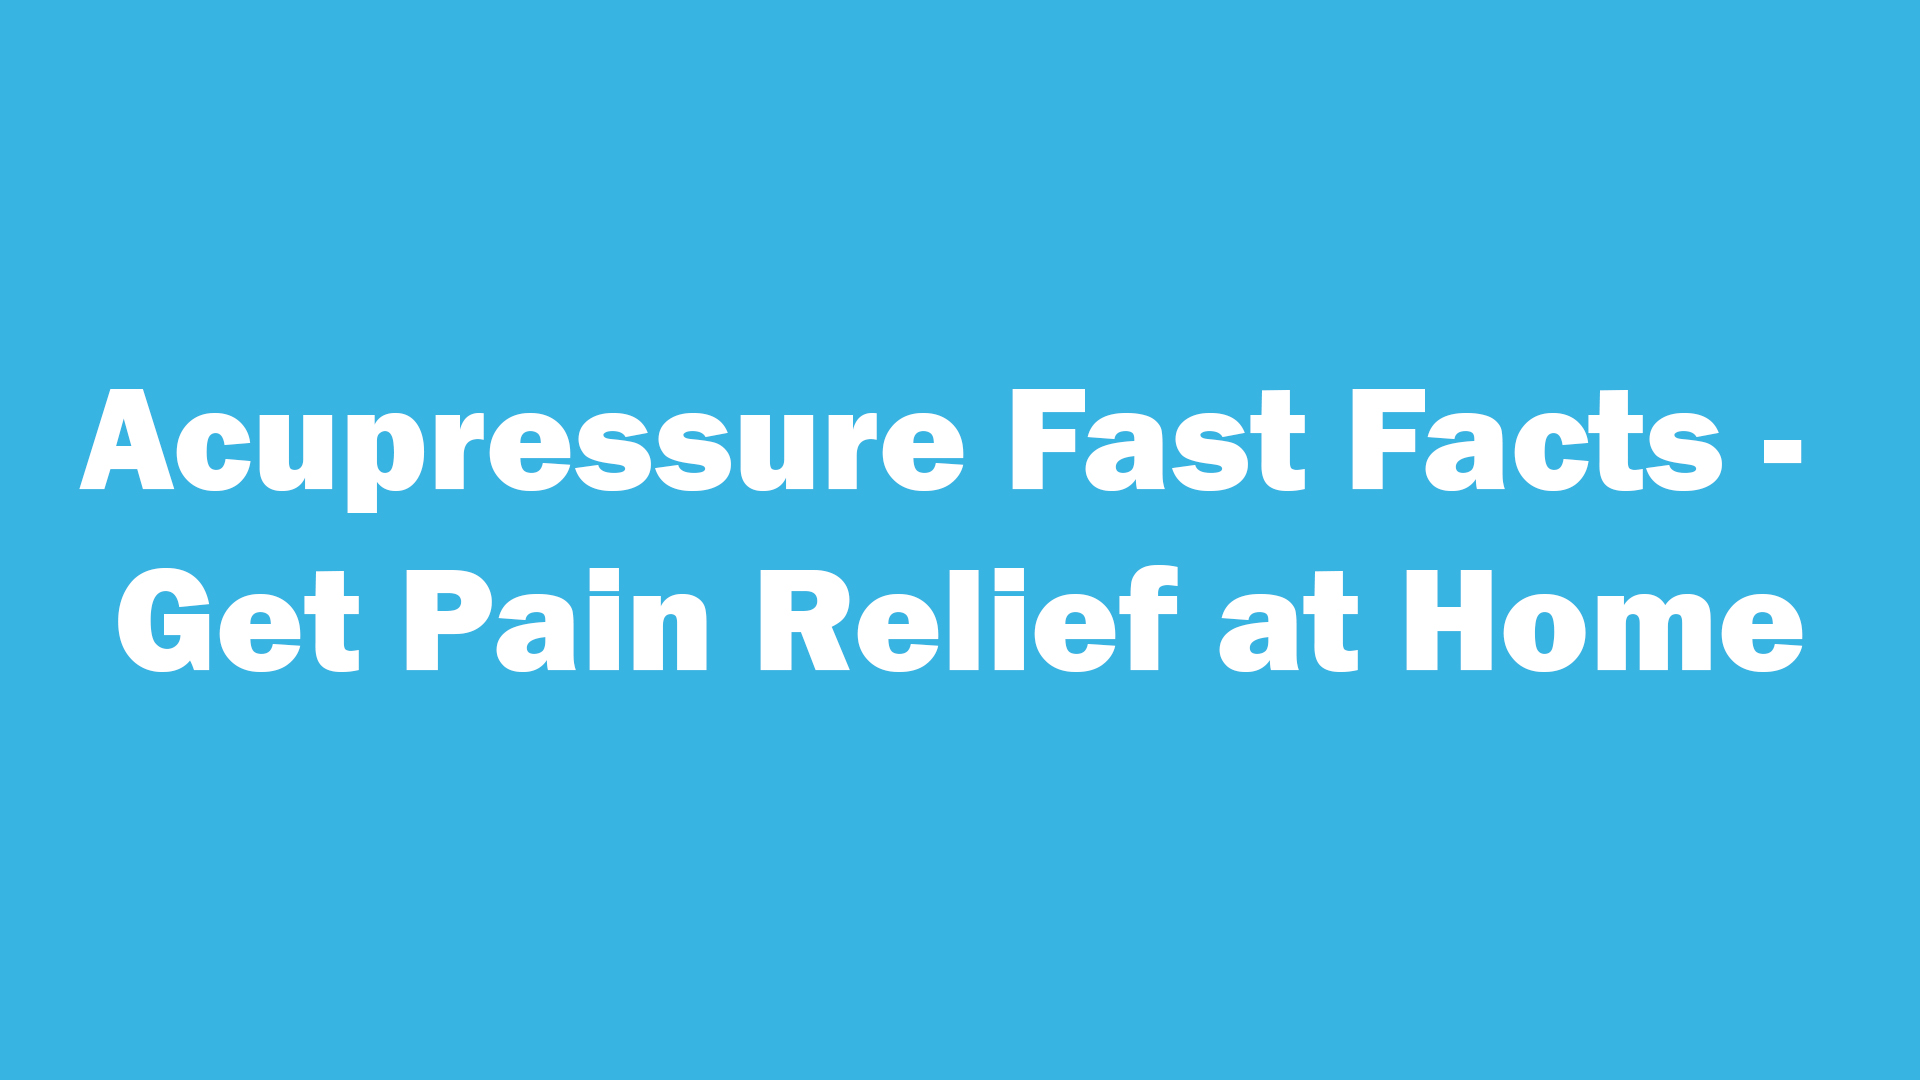 Acupressure Fast Facts - Get Pain Relief at Home